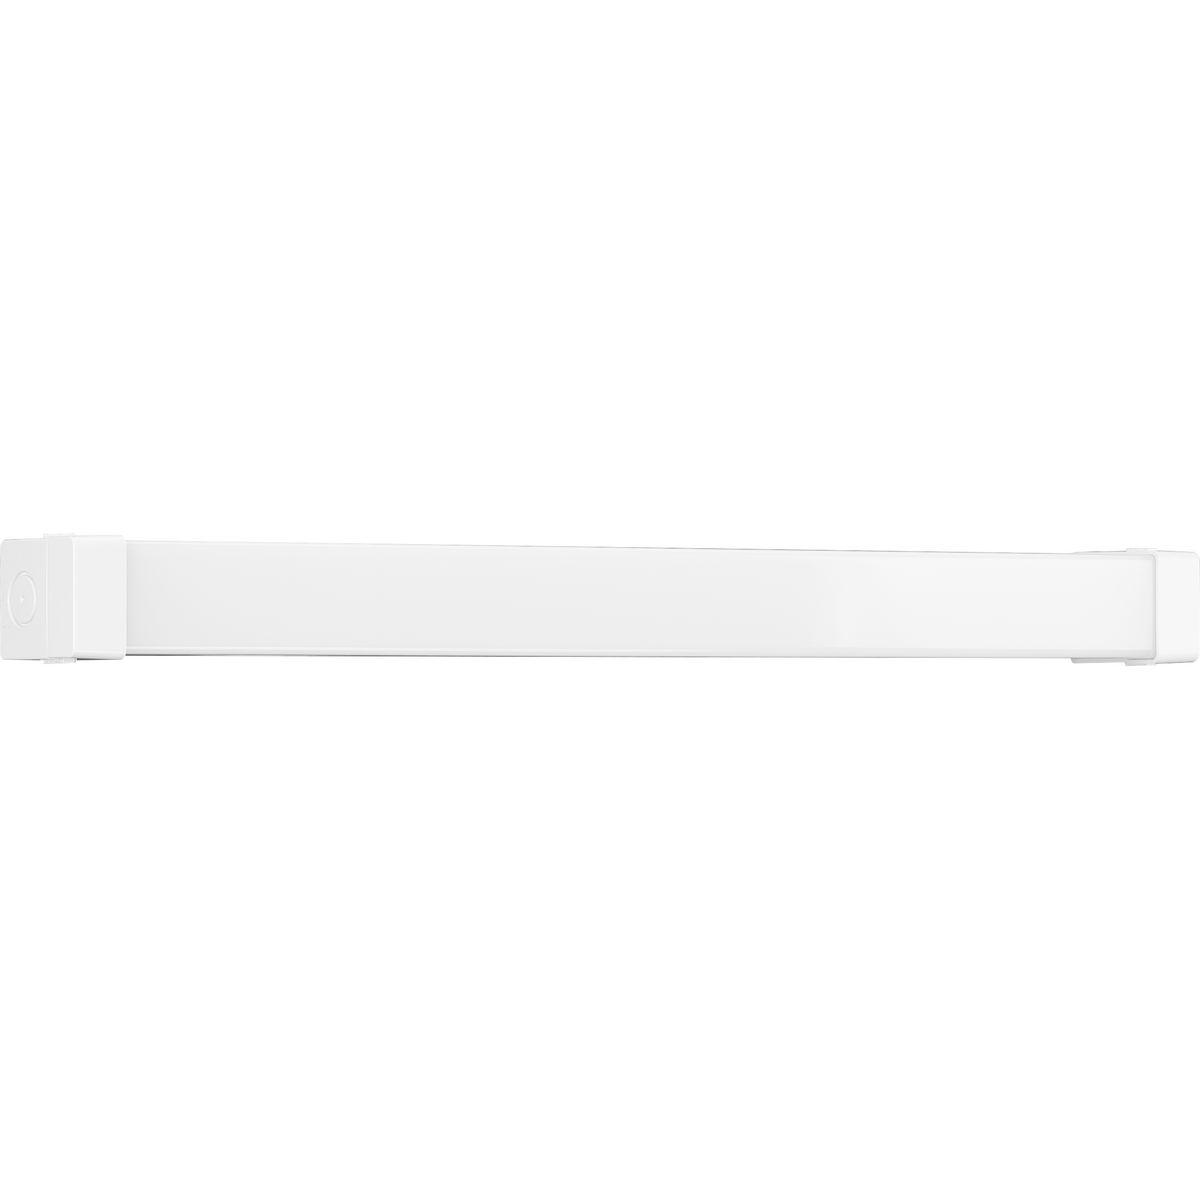 Hubbell P730000-030-30 The Wrap and Strip Collection's Two-Foot LED Strip Light features a crisp white acrylic diffuser shaped into an elegant elongated silhouette. The light fixture is complemented by white end caps and a white metal chassis. The strip light can be mounted on 